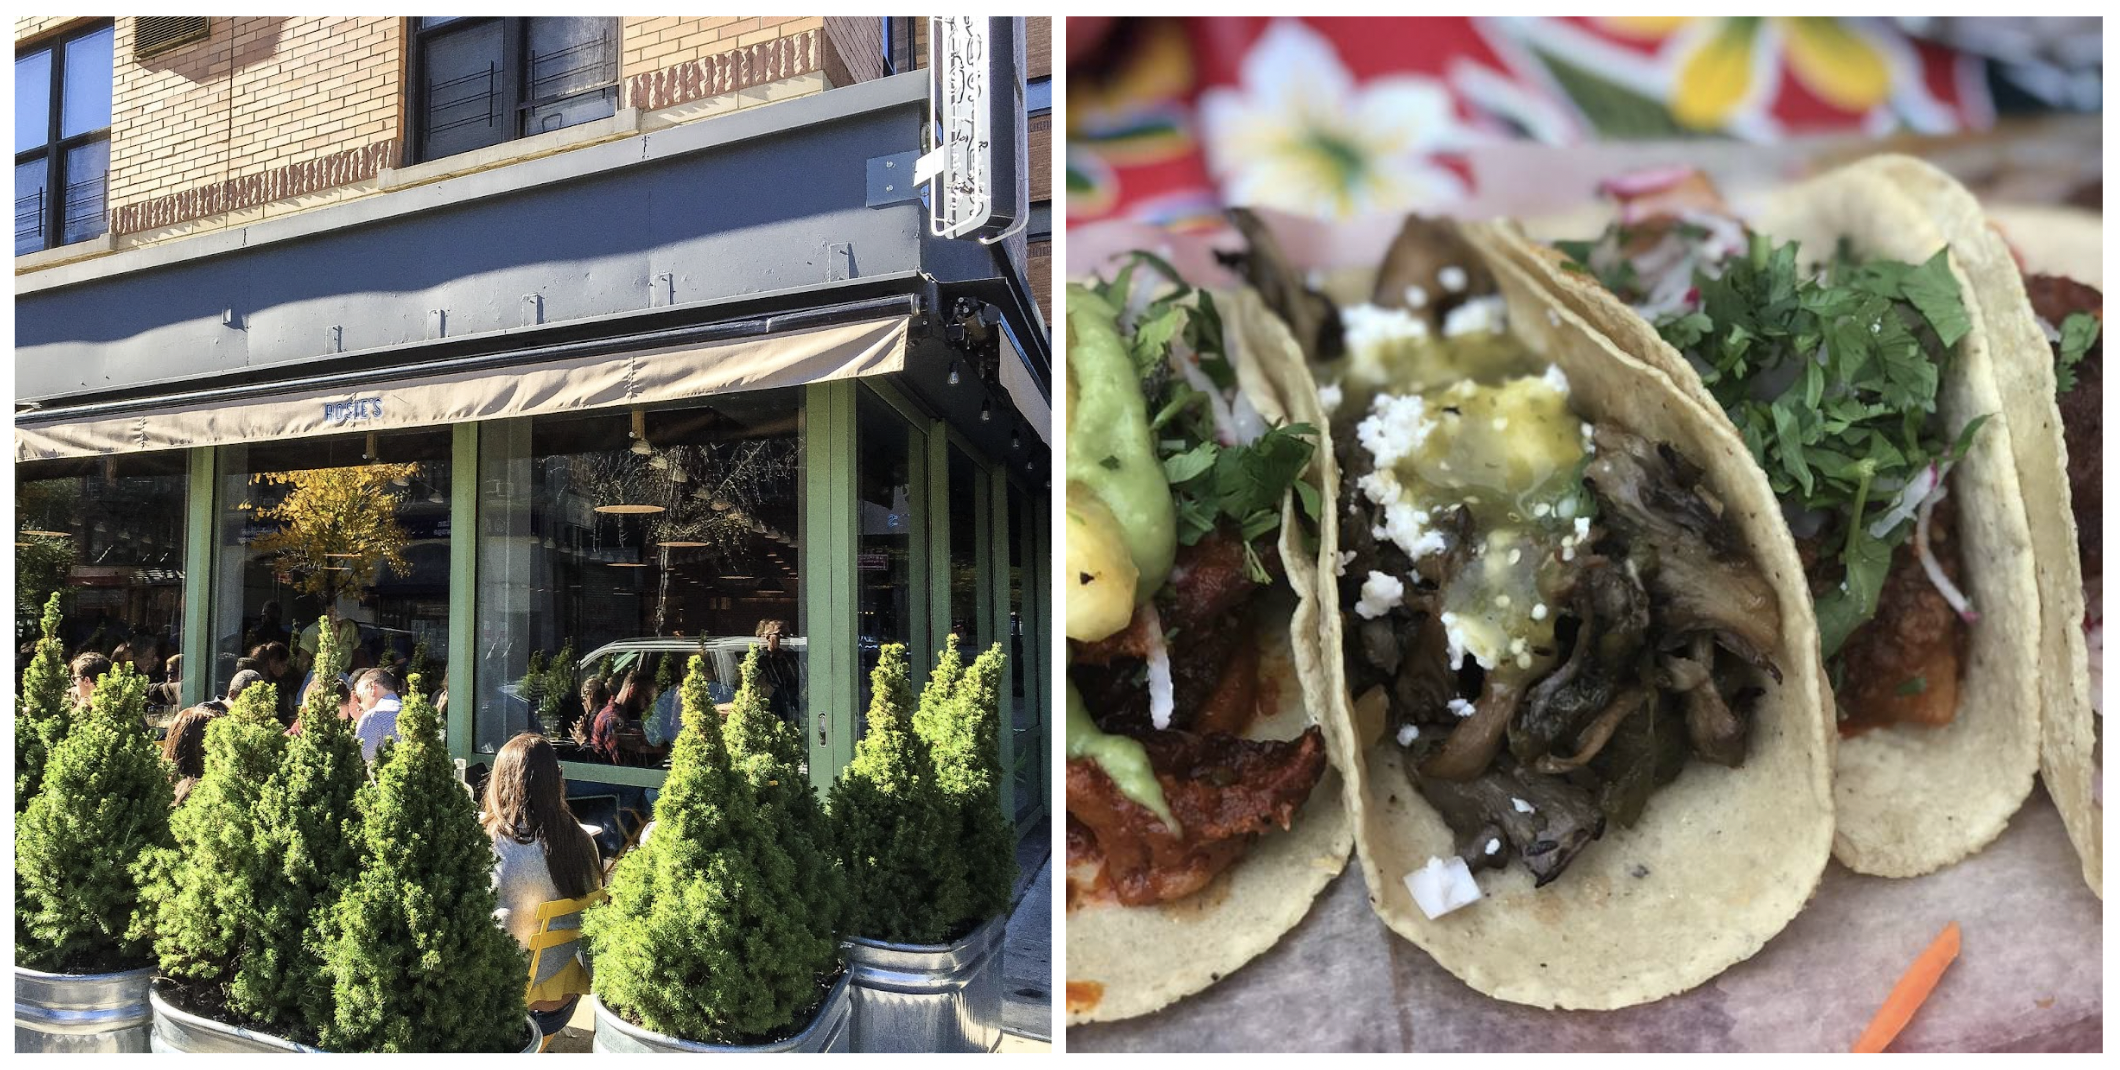 Exterior view of Rosie’s and a line up of street tacos.